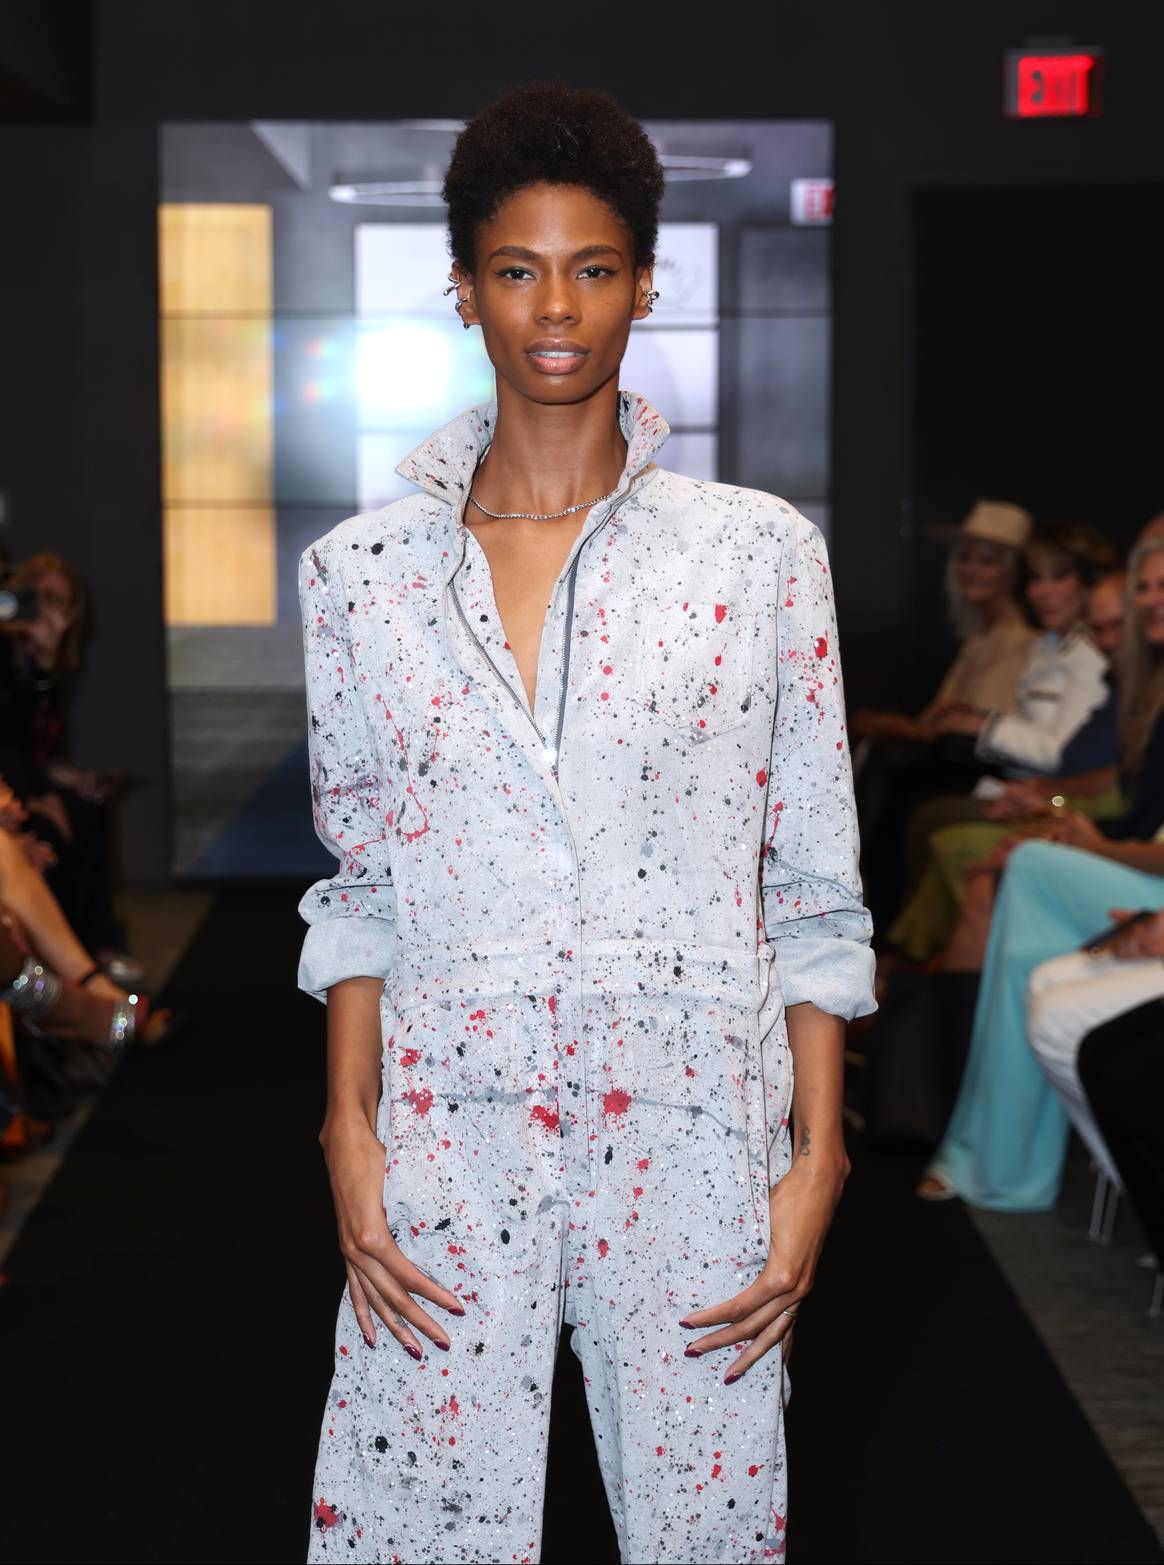 Model wearing the winning design by Ryan Anthony Hamilton during With Love Halston event hosted by Istituto Marangoni on 28 Nov. 2022 in Miami, Florida. (Photo by Rodrigo Varela/Getty Images for Istituto Marangoni Miami)